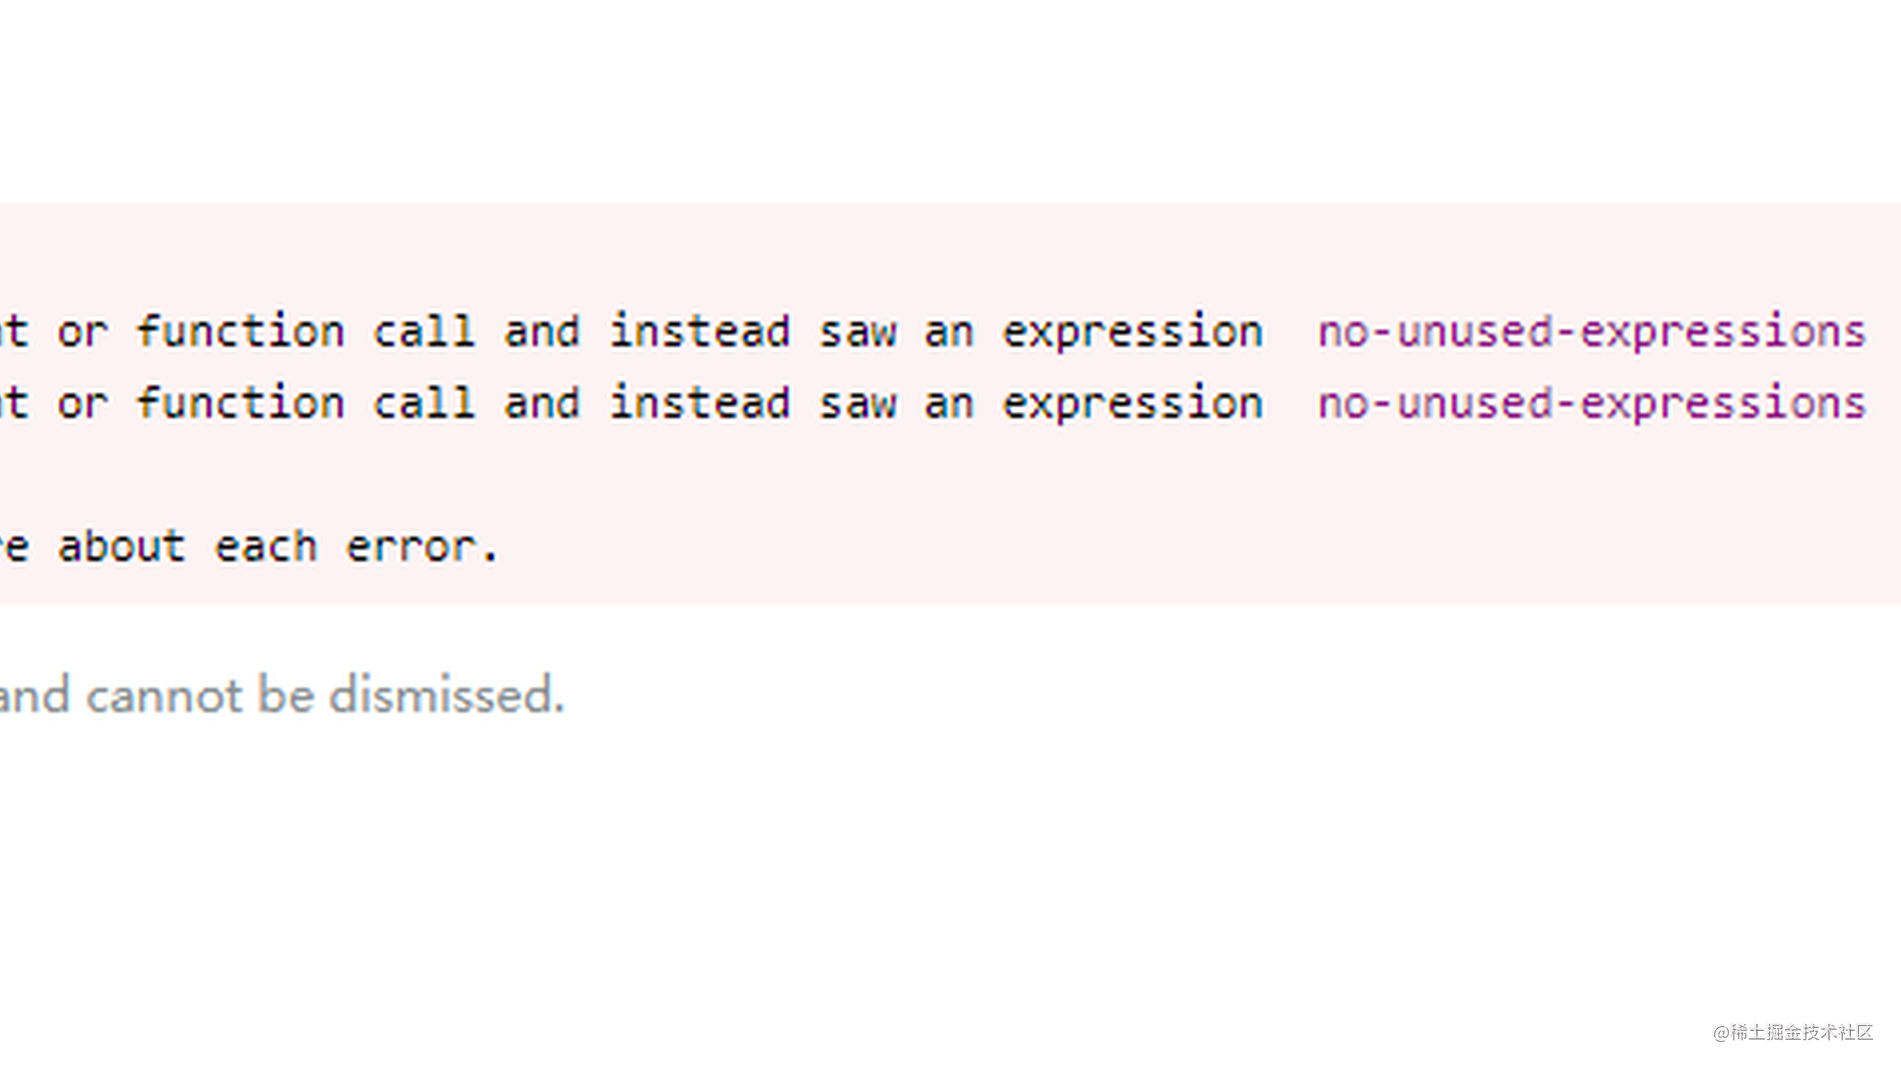 unused expression expected an assignment or function call angular